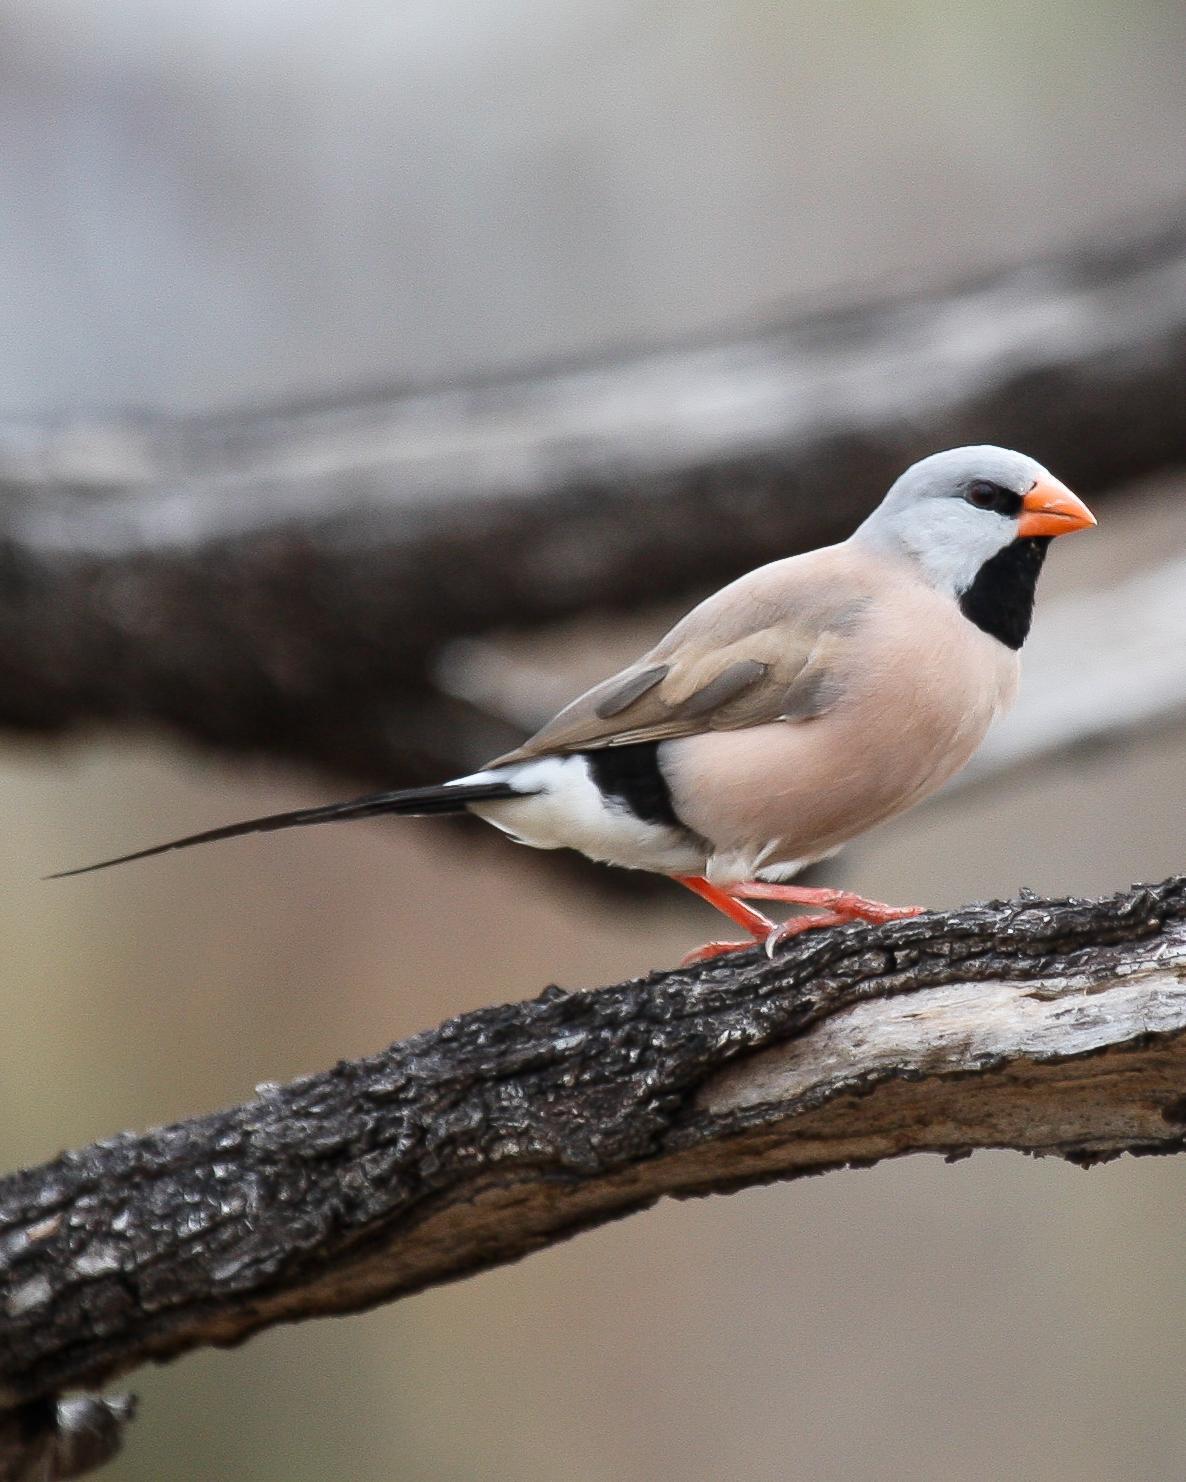 Long-tailed Finch Photo by Robert Lewis